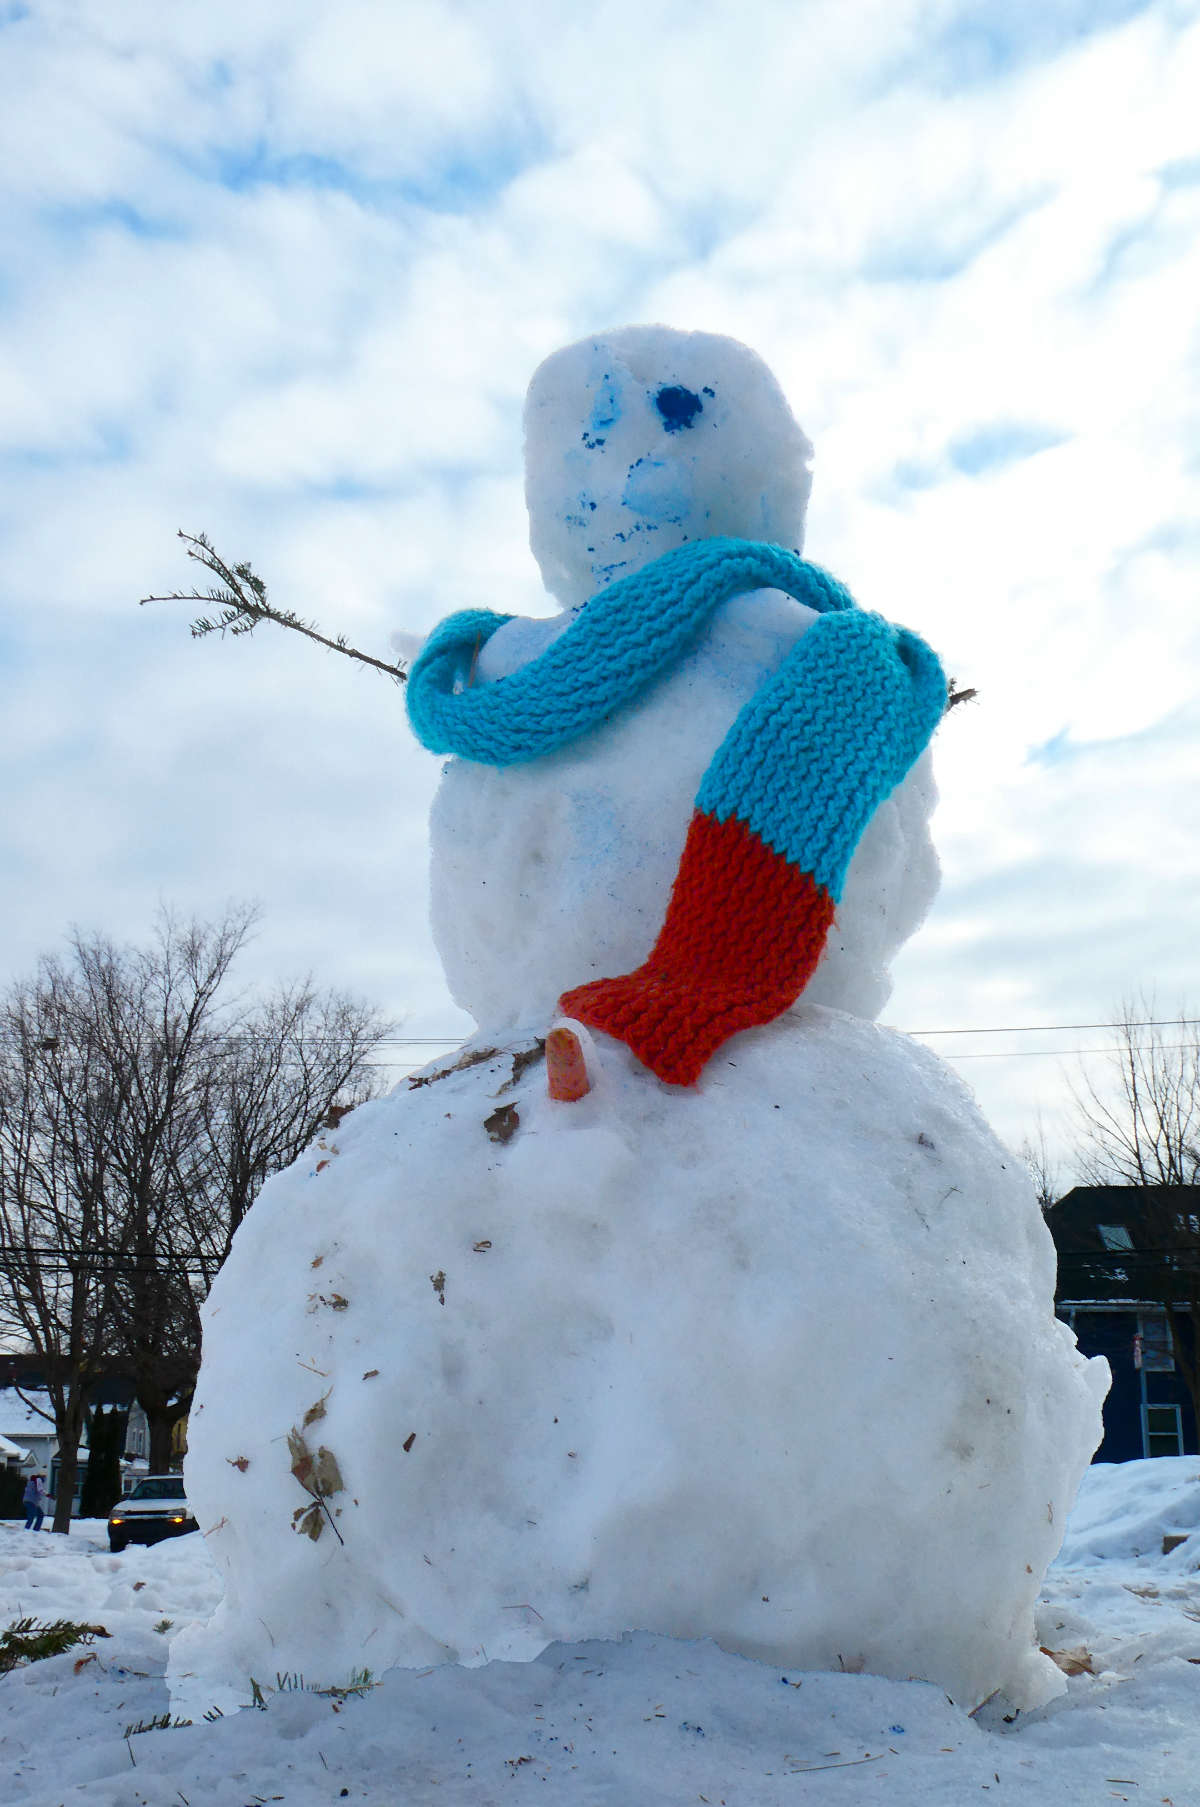 looking up at a snowman with one coal eye, one stick arm, and a blue and red scarf with a cloudy blue sky overhead